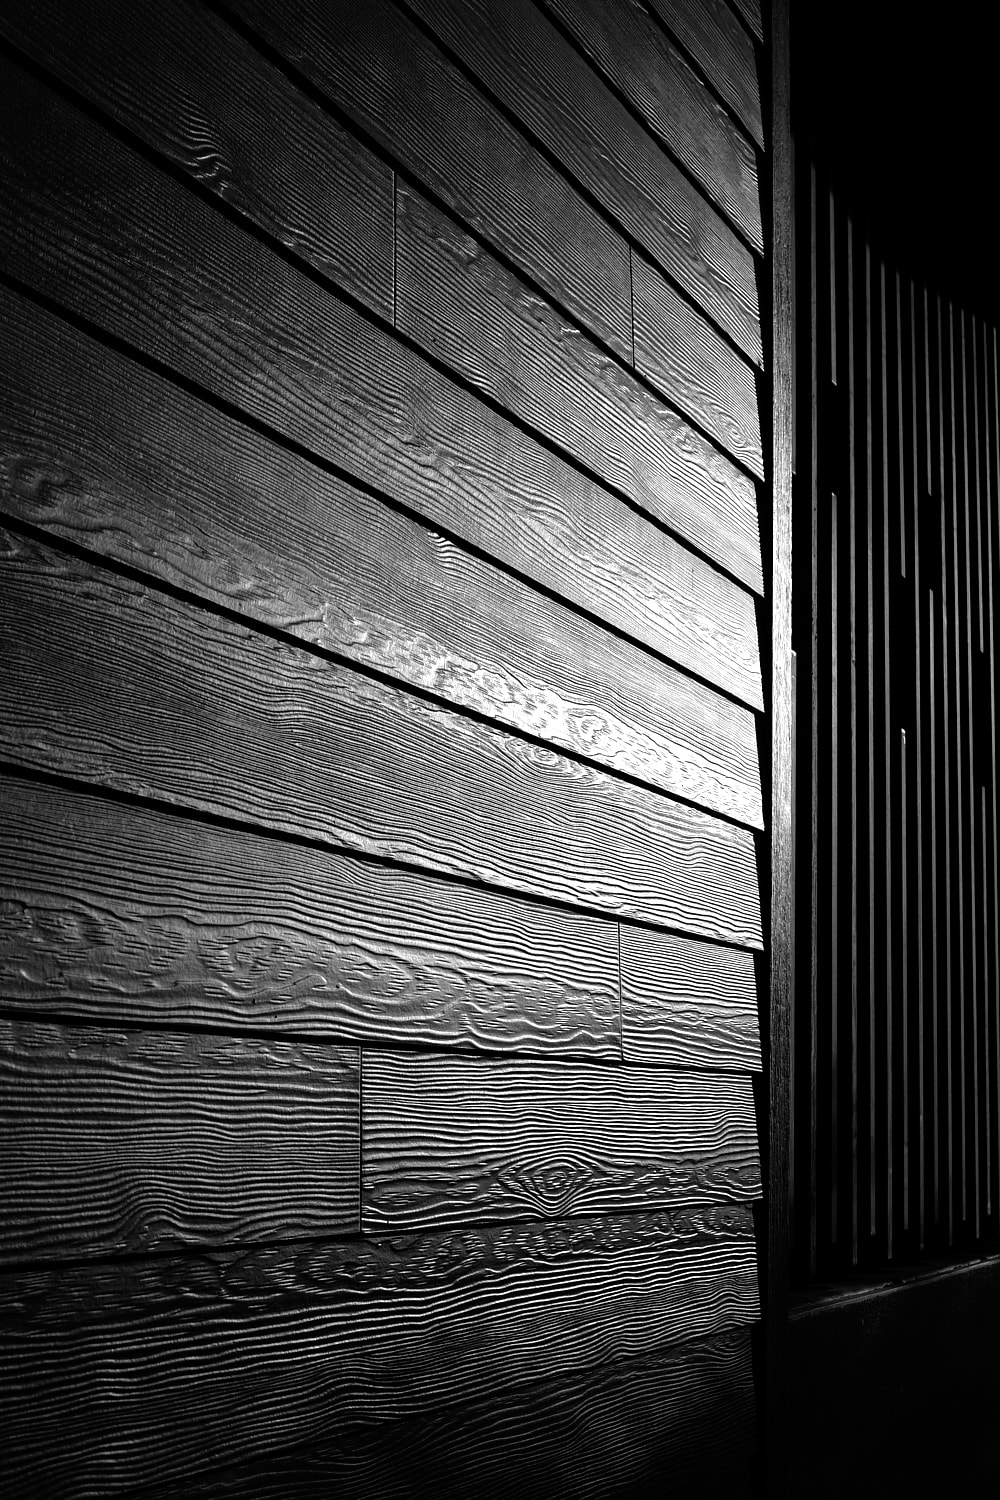 Black and white portrait photo of a side of a building clad in wood. The mid-day sun shows the detail in the grain of wood creating interesting textures.